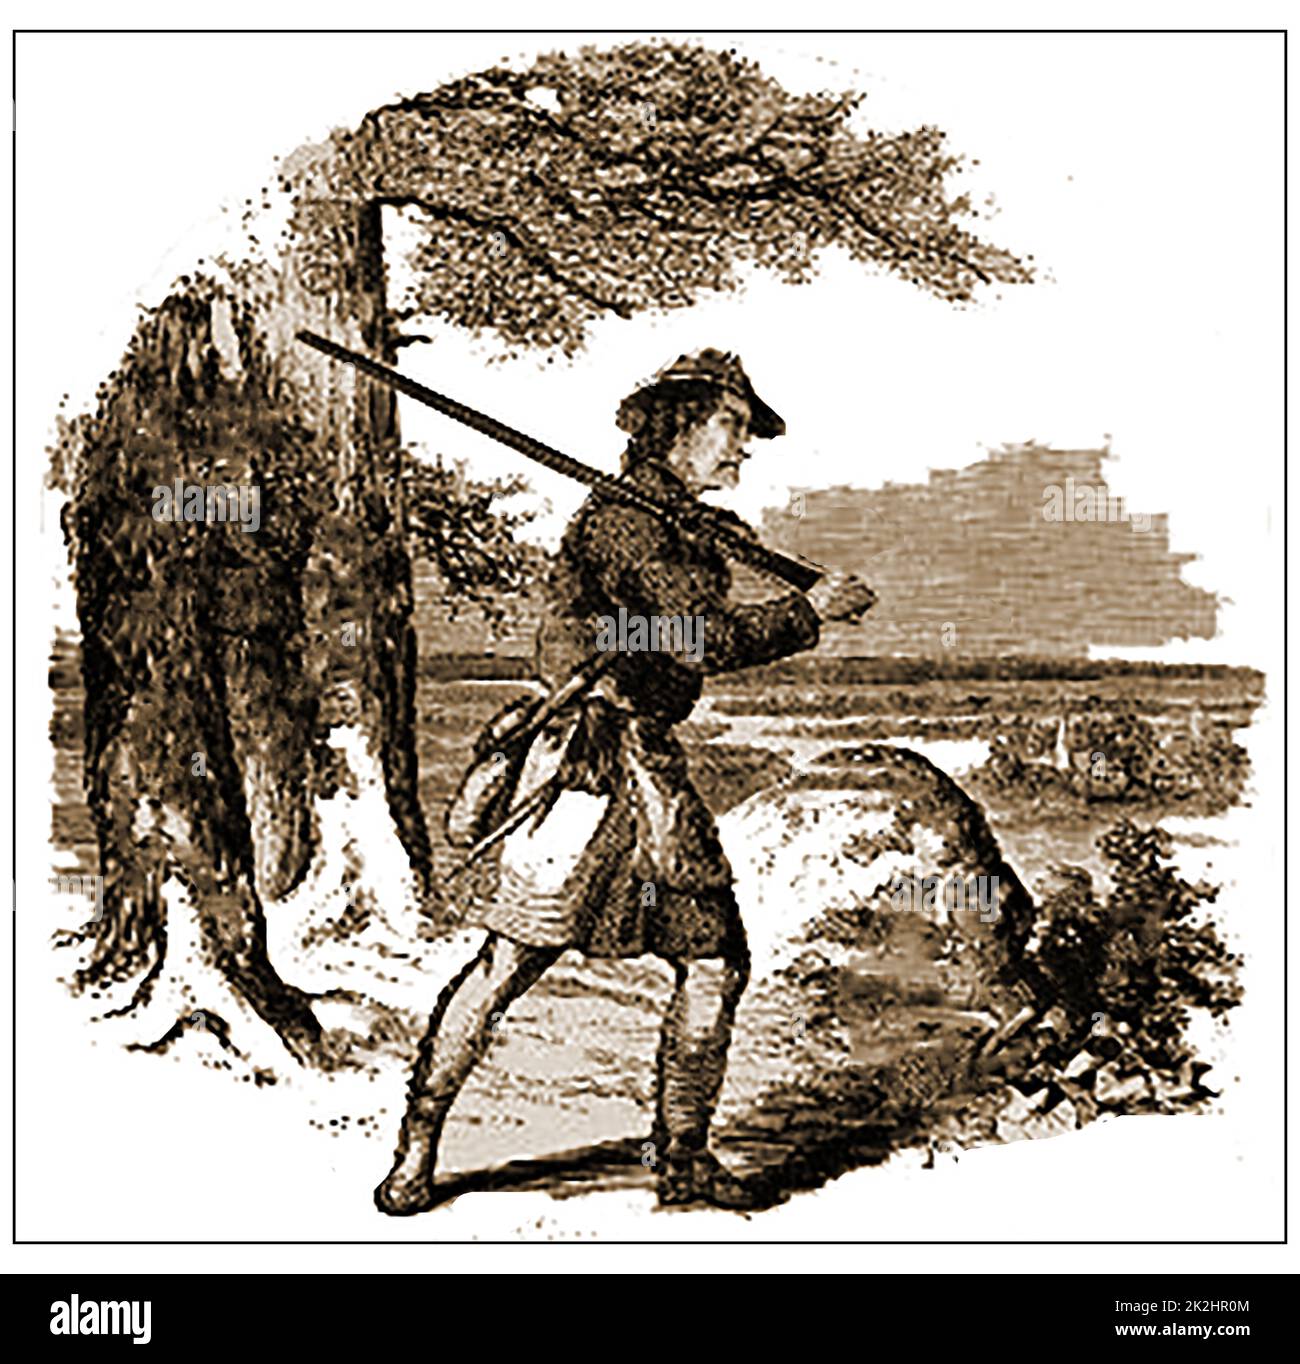 A 19th century engraving showing a typical American frontiersman  brought in to help fight in the Indian Wars against new settlers. Stock Photo